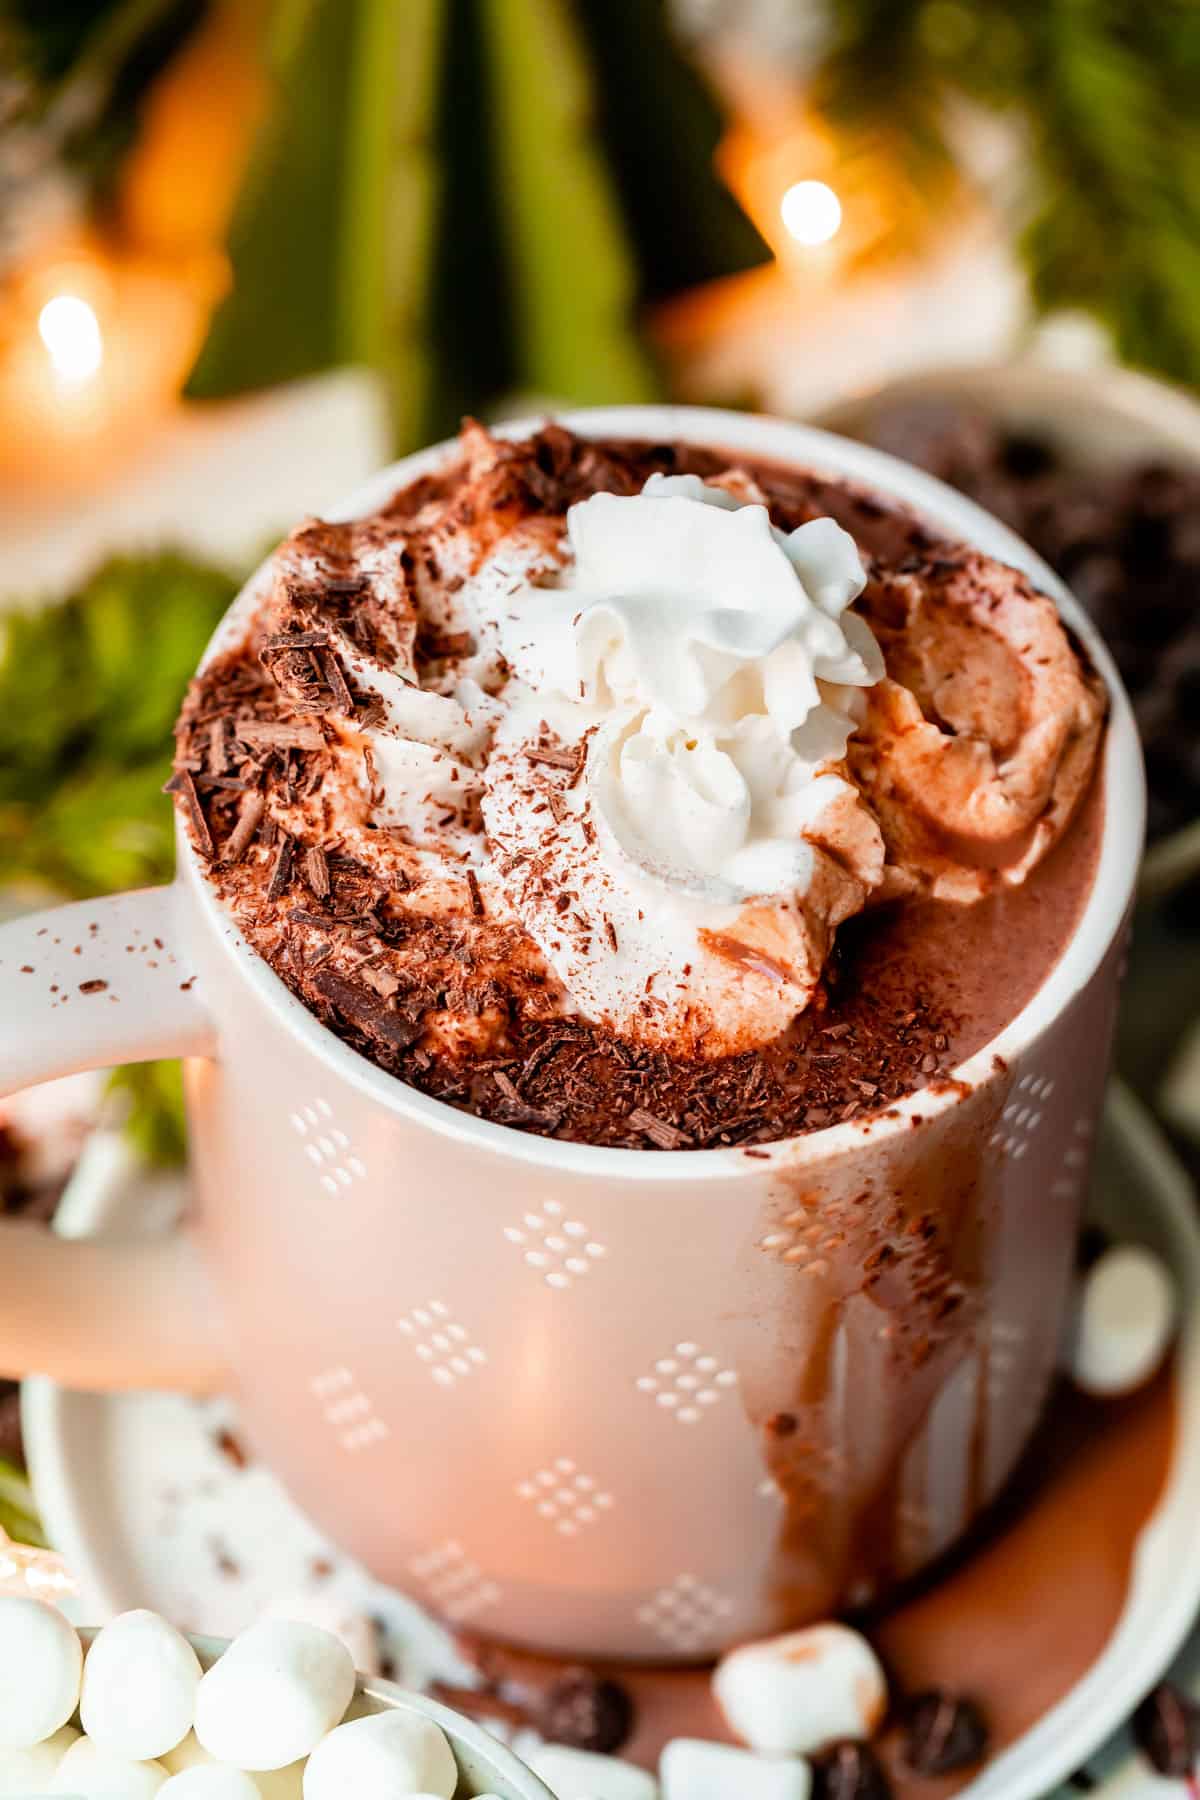 a gray mug of homemade hot chocolate on a table with whipped cream and greenery in the background.